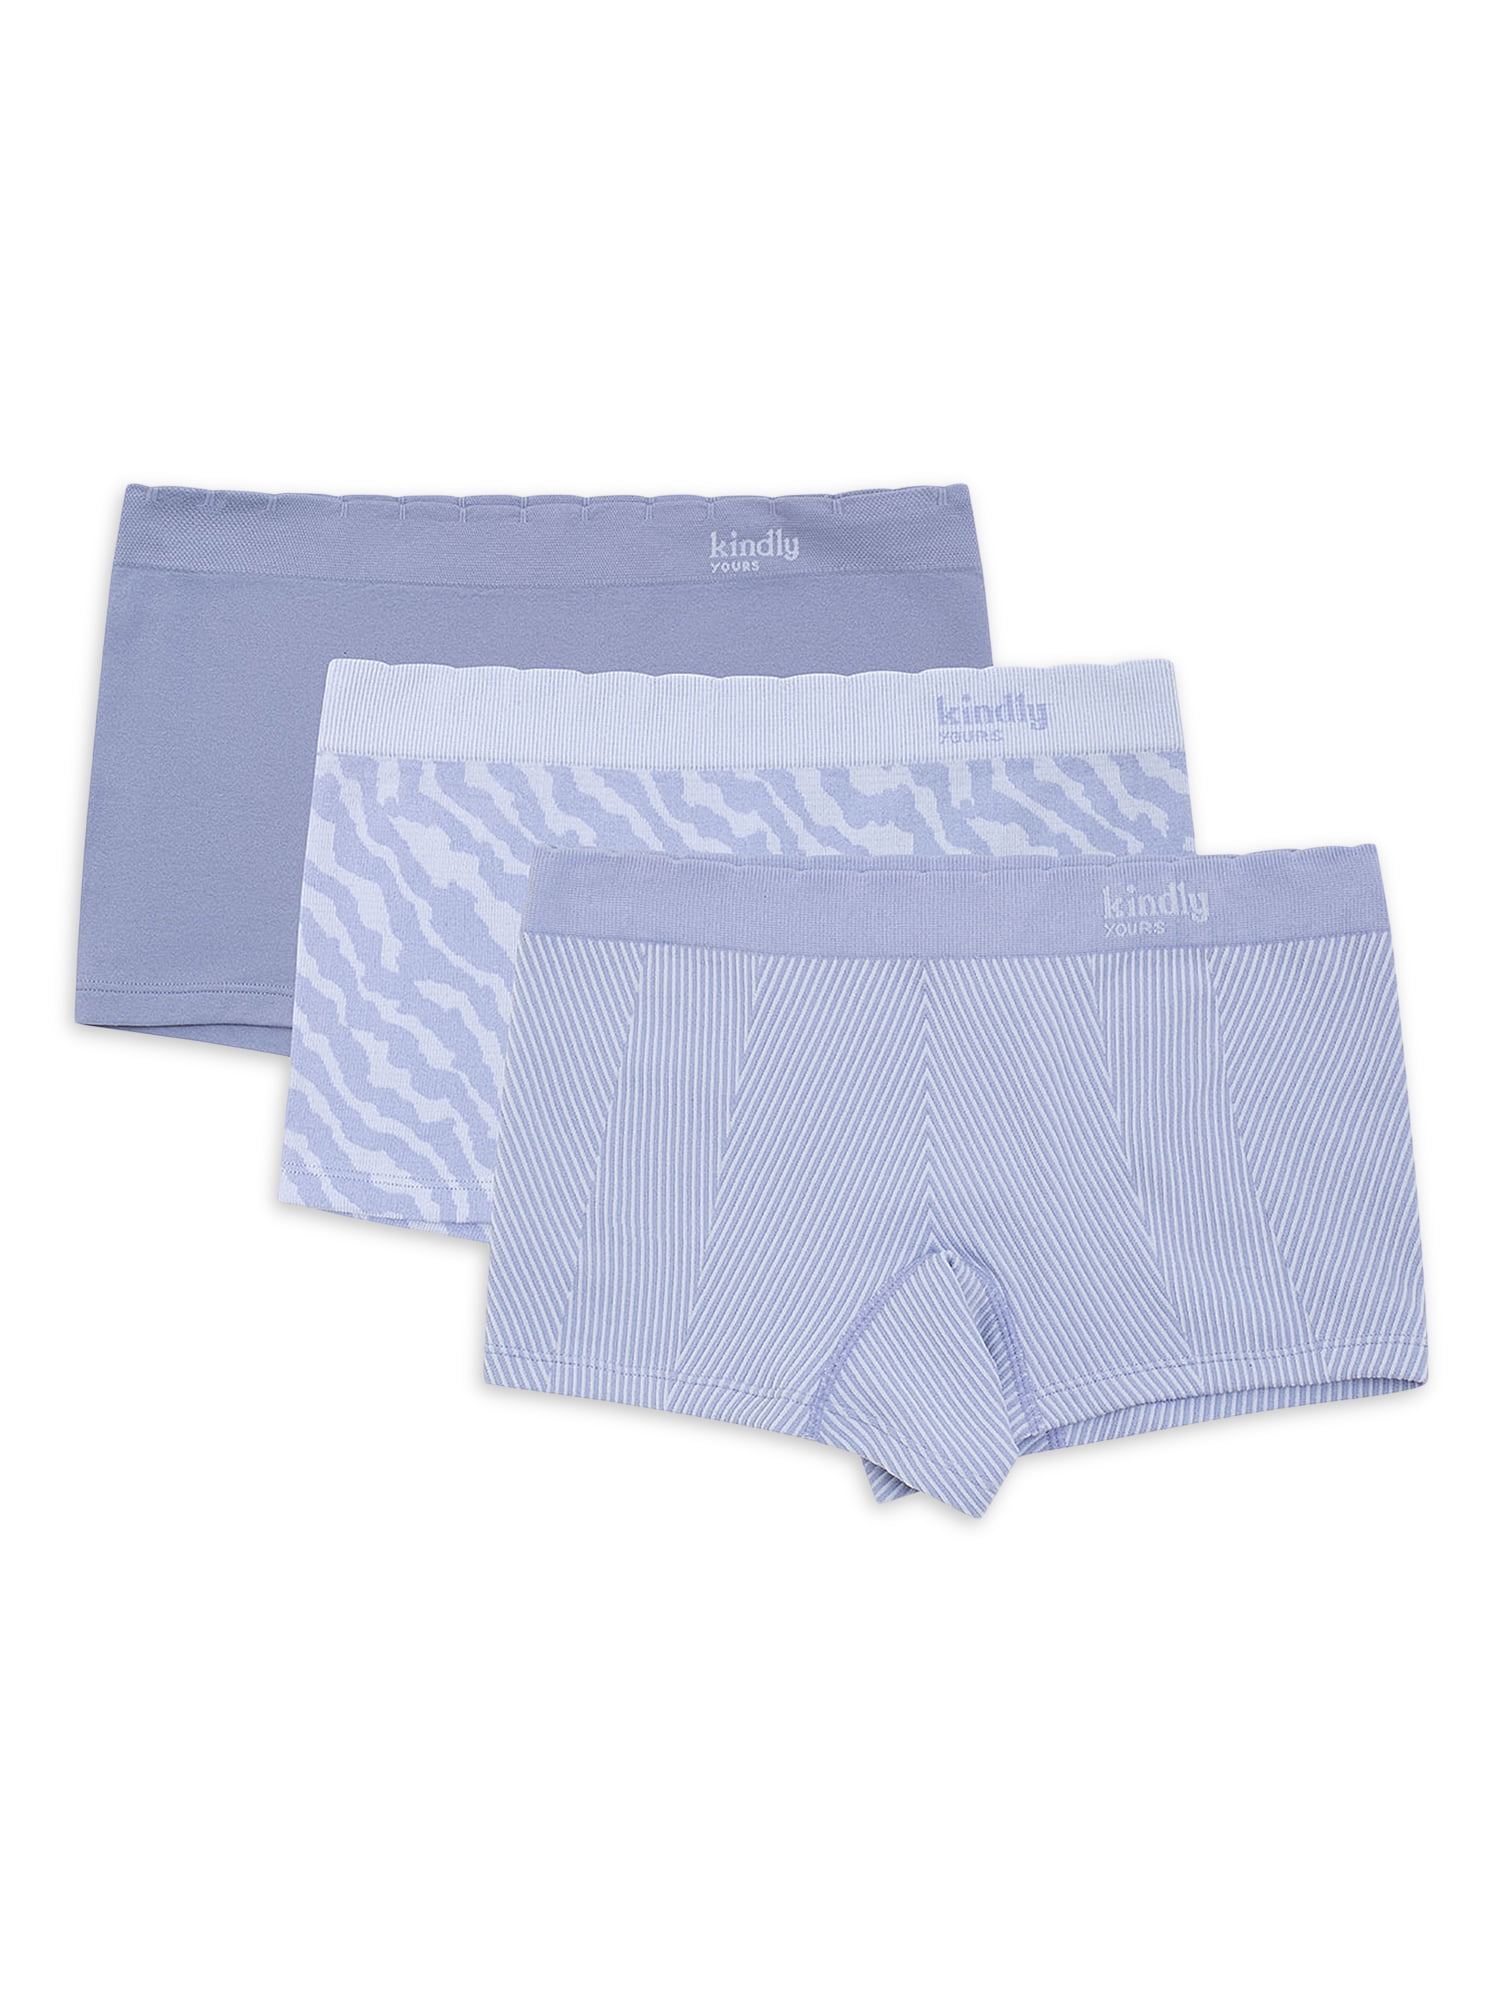 Kindly Yours Women's Sustainable Seamless Boyshort Underwear, 3-Pack